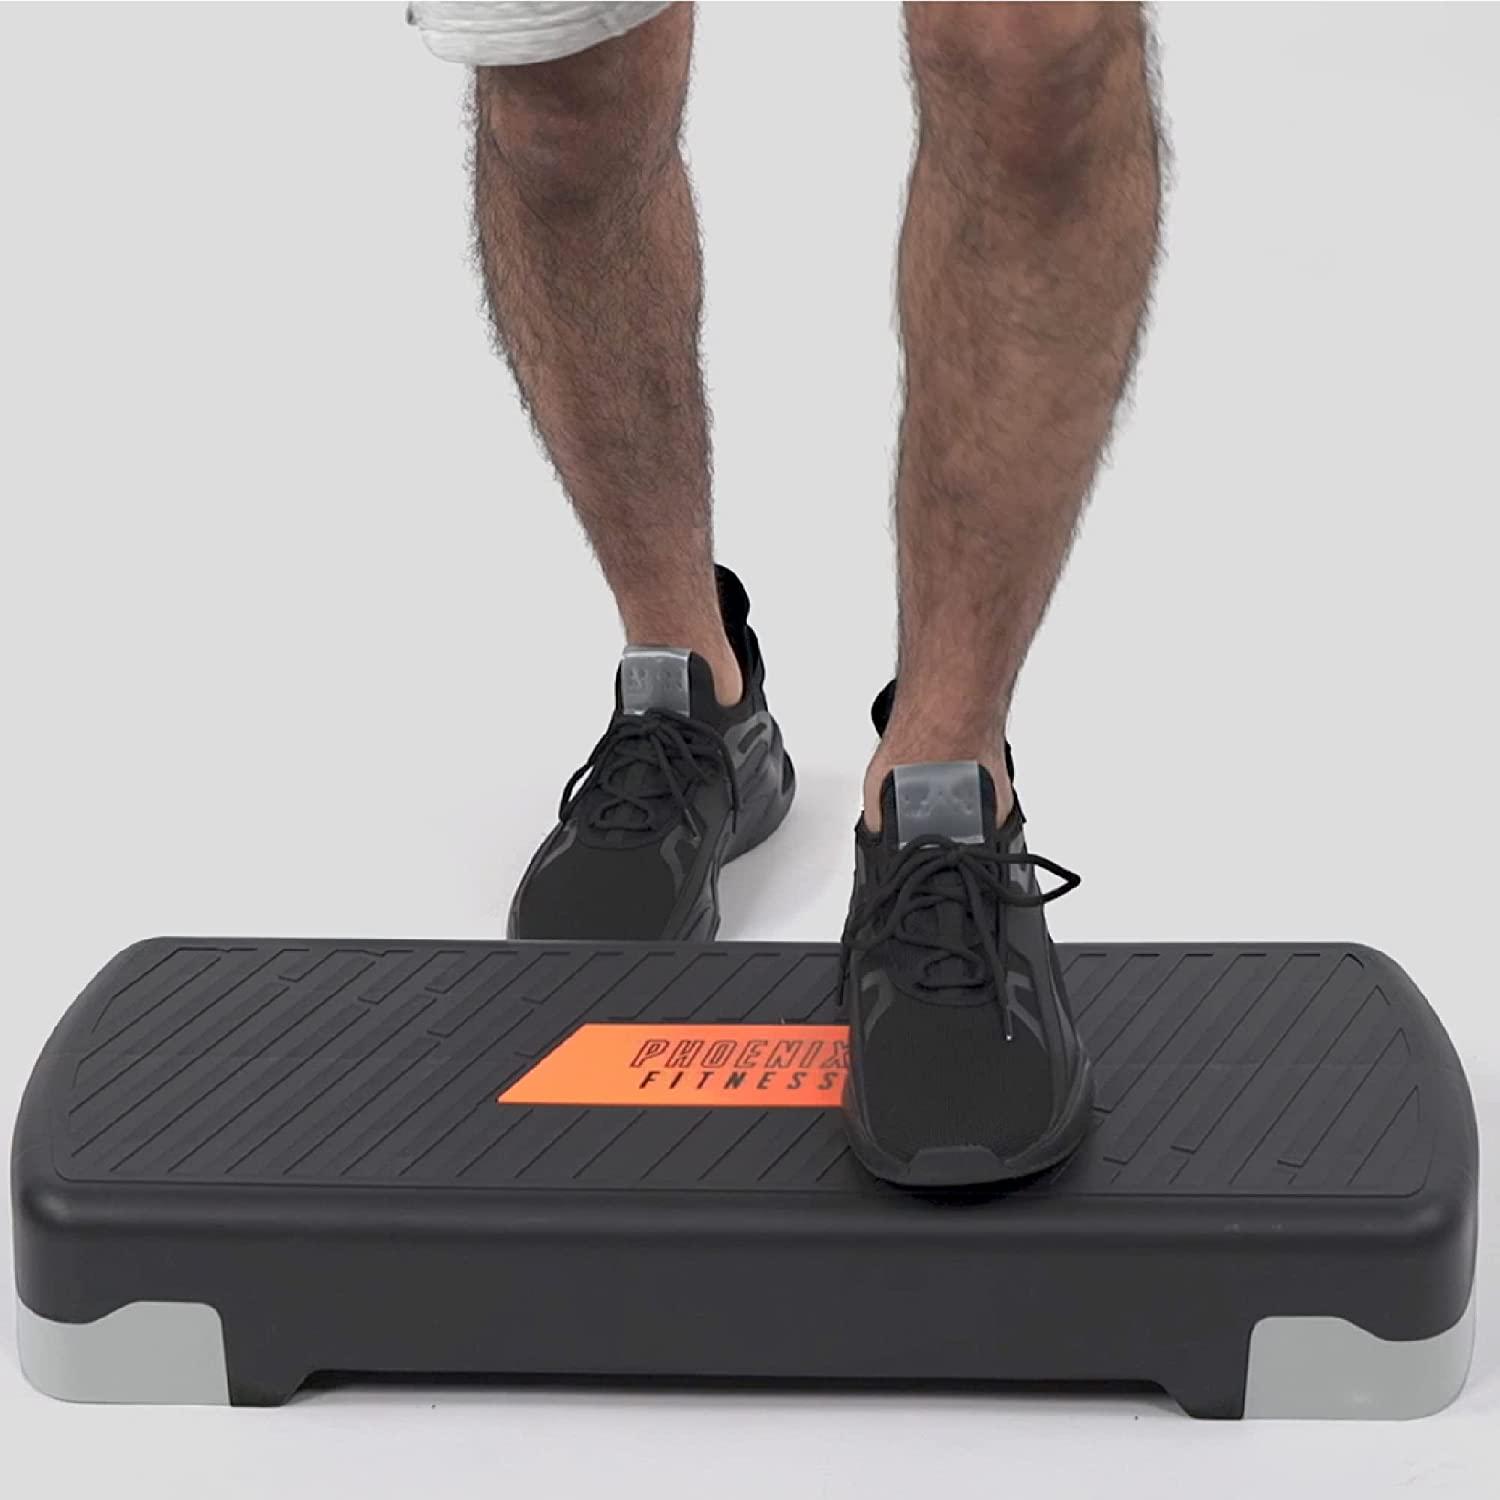 Fitness Aerobic Step, Adjustable from 4” to 6”, Exercise Stepper with  Risers for Home Gym Cardio Strength Training